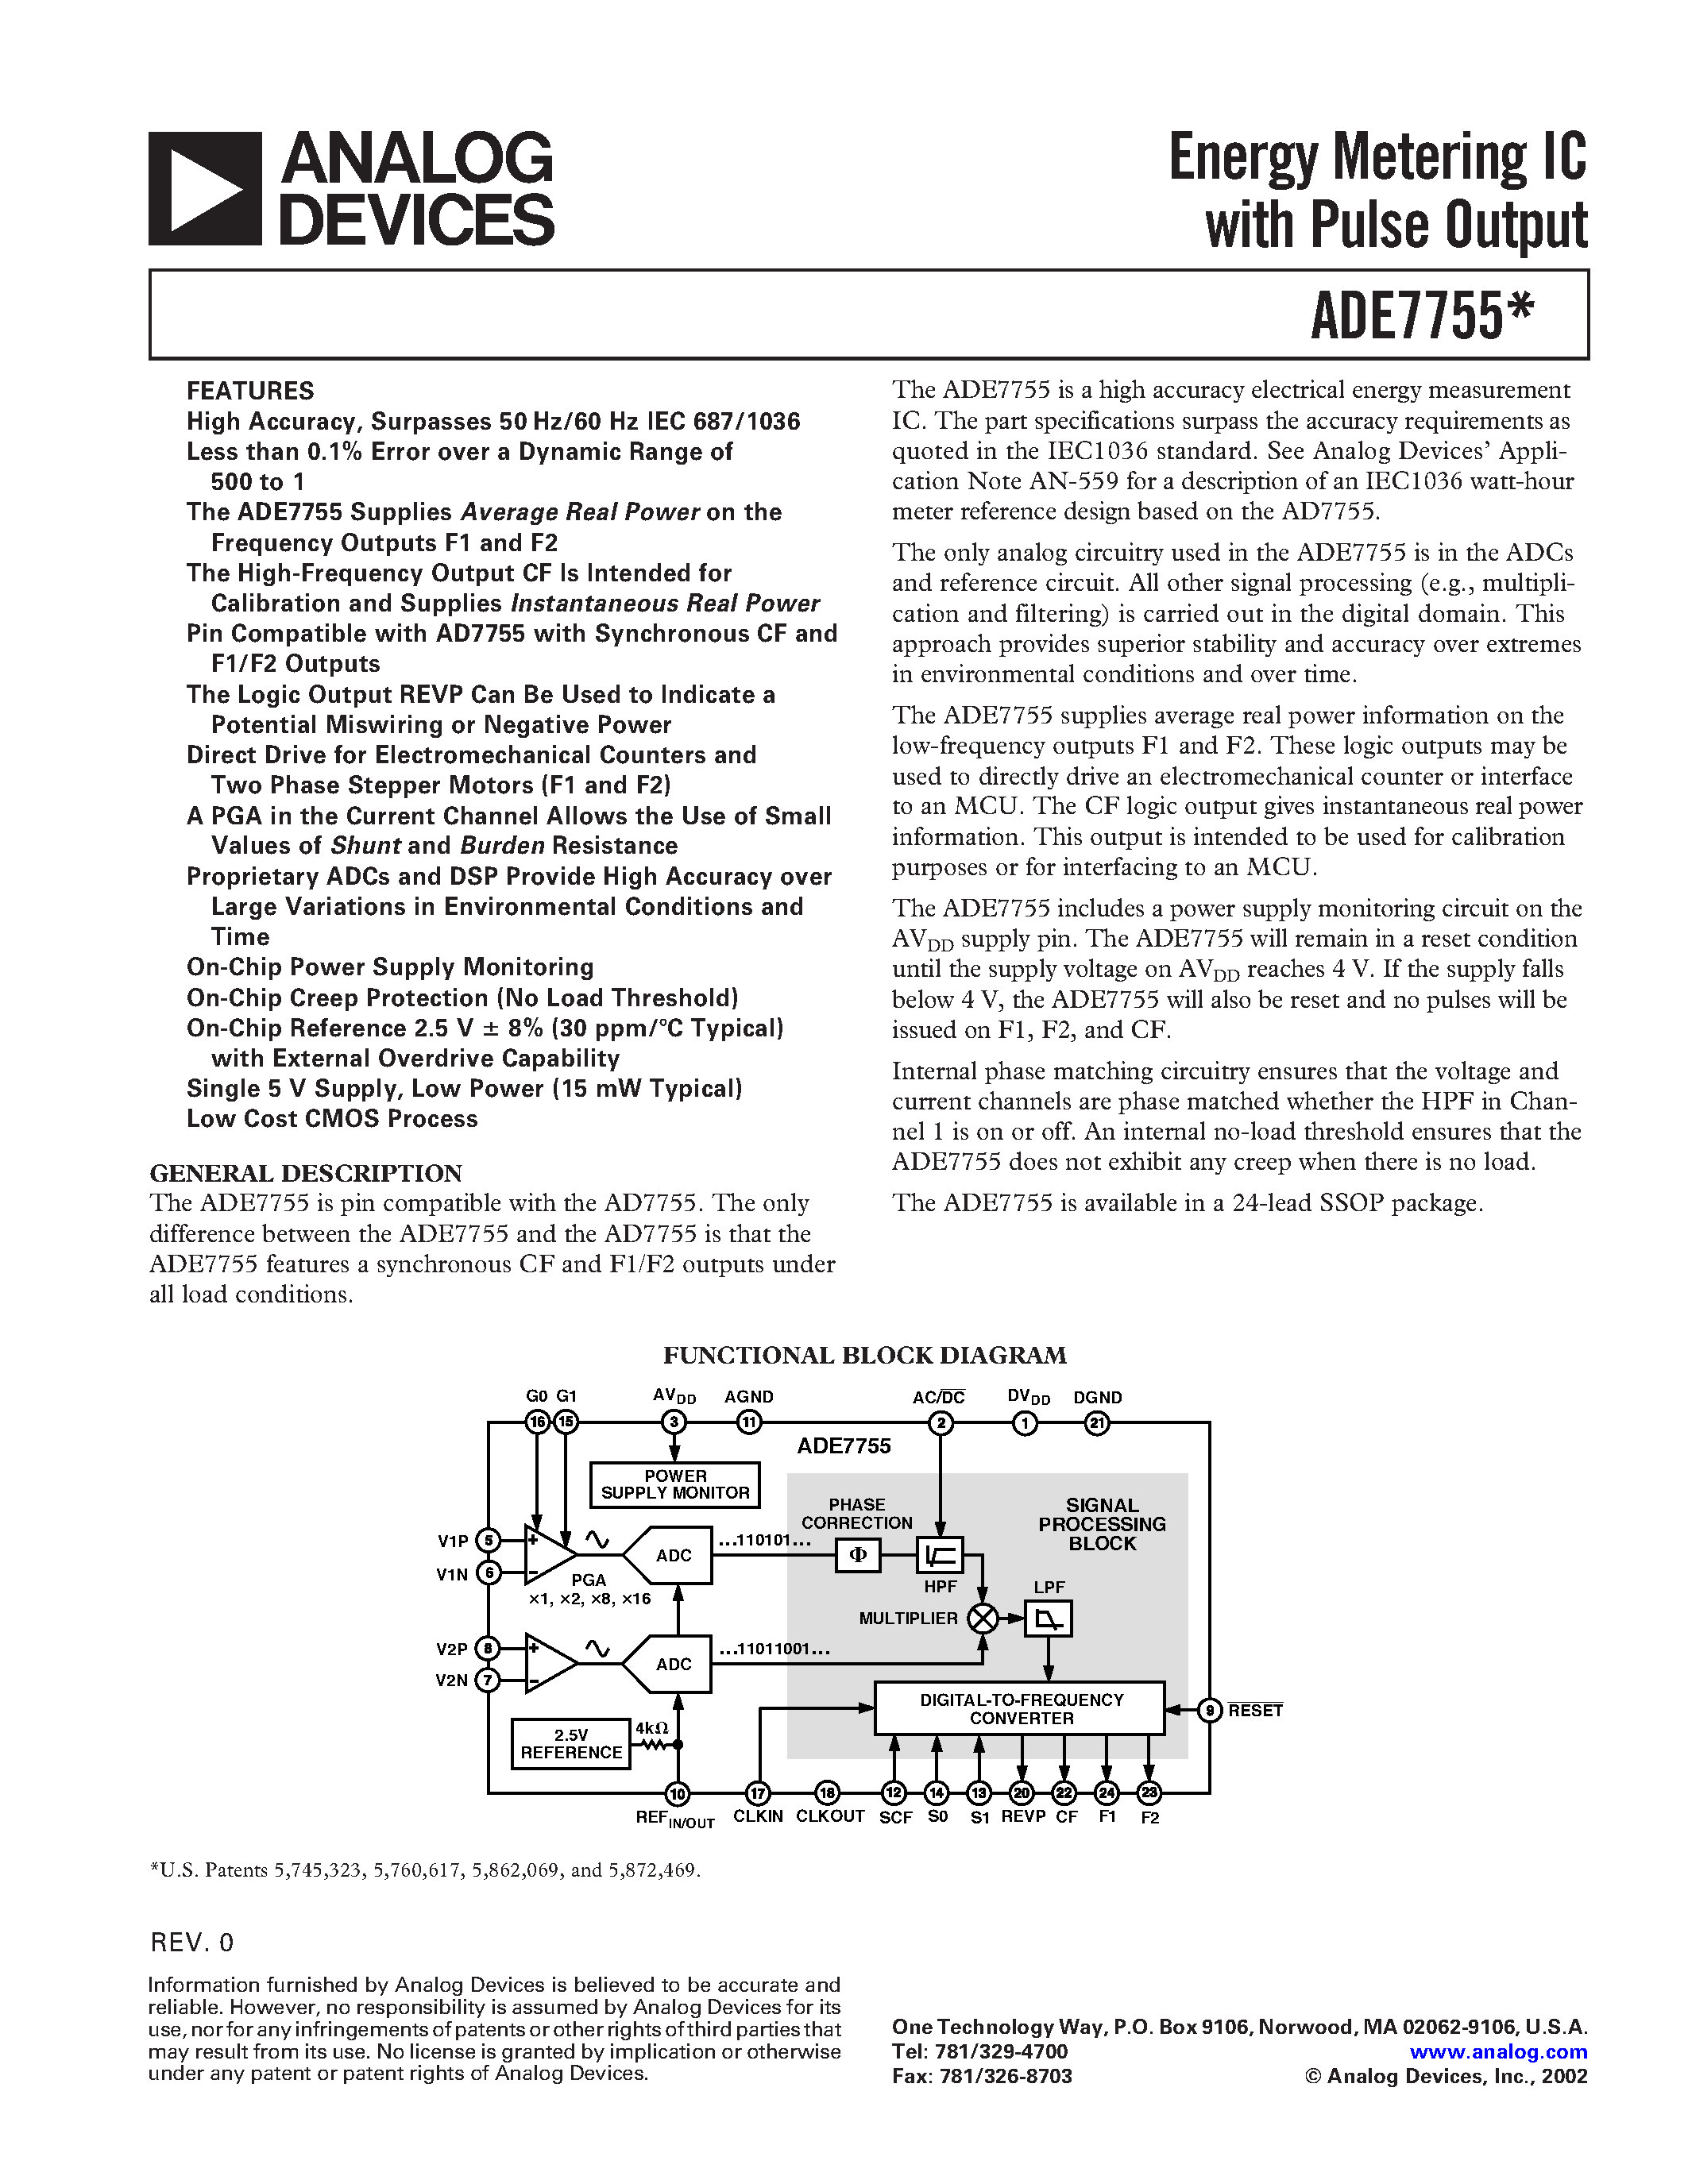 Даташит ADE7755ARSRL - Energy Metering IC with Pulse Output страница 1